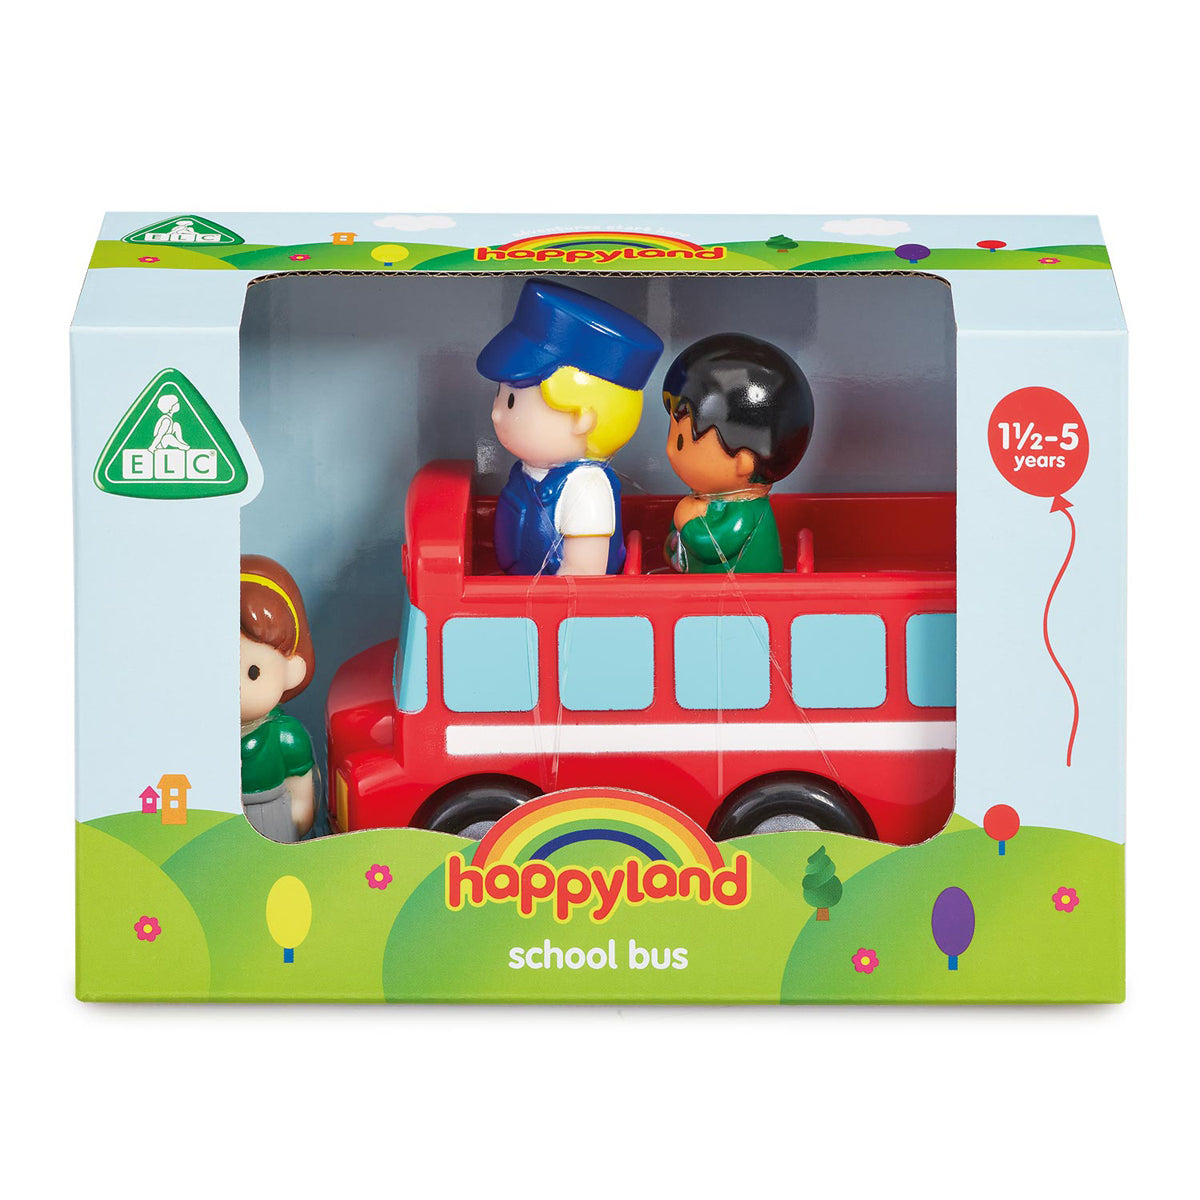 Happyland School Bus with Driver and Children Figures